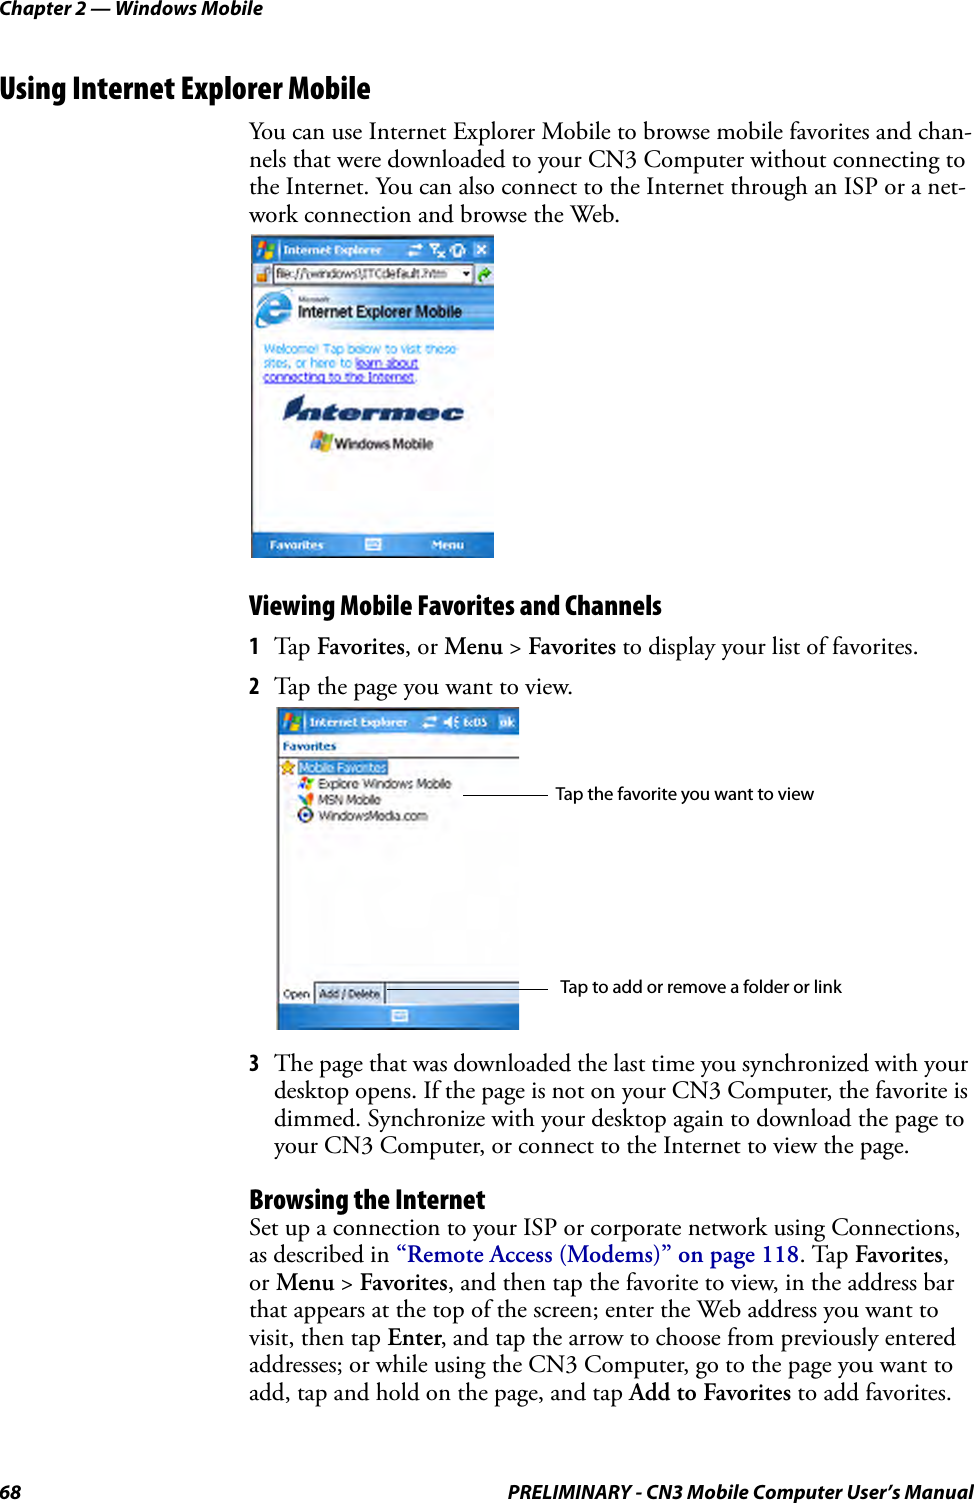 Chapter 2 — Windows Mobile68 PRELIMINARY - CN3 Mobile Computer User’s ManualUsing Internet Explorer MobileYou can use Internet Explorer Mobile to browse mobile favorites and chan-nels that were downloaded to your CN3 Computer without connecting to the Internet. You can also connect to the Internet through an ISP or a net-work connection and browse the Web.Viewing Mobile Favorites and Channels1Tap Favorites, or Menu &gt; Favorites to display your list of favorites.2Tap the page you want to view.3The page that was downloaded the last time you synchronized with your desktop opens. If the page is not on your CN3 Computer, the favorite is dimmed. Synchronize with your desktop again to download the page to your CN3 Computer, or connect to the Internet to view the page.Browsing the InternetSet up a connection to your ISP or corporate network using Connections, as described in “Remote Access (Modems)” on page 118. Tap Favorites, or Menu &gt; Favorites, and then tap the favorite to view, in the address bar that appears at the top of the screen; enter the Web address you want to visit, then tap Enter, and tap the arrow to choose from previously entered addresses; or while using the CN3 Computer, go to the page you want to add, tap and hold on the page, and tap Add to Favorites to add favorites.Tap the favorite you want to viewTap to add or remove a folder or link